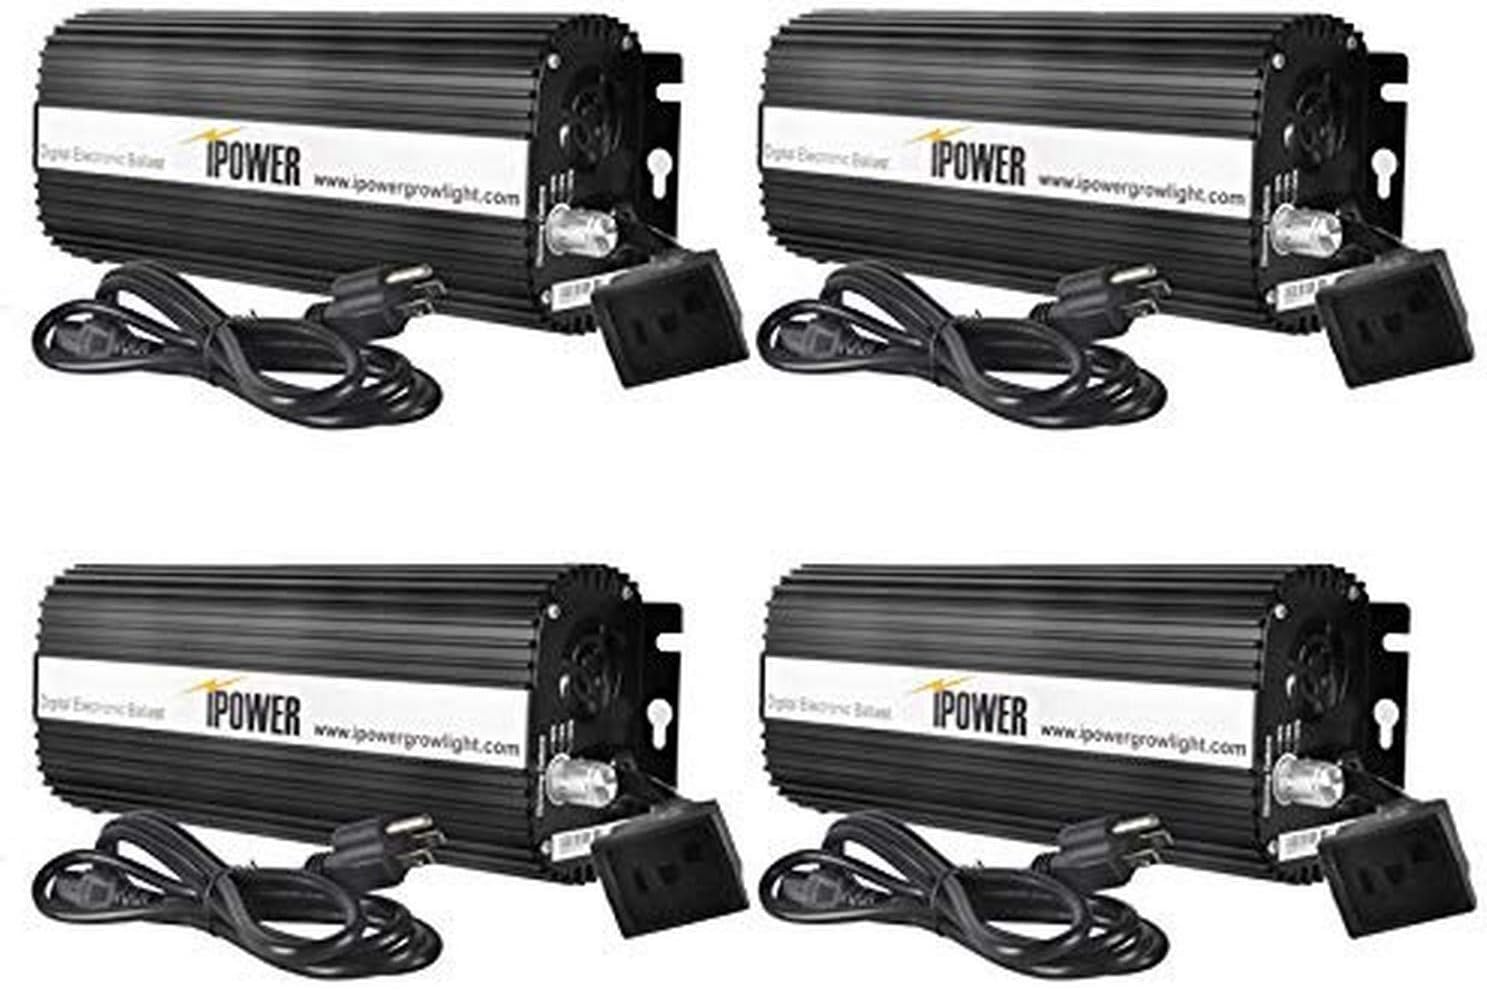 iPower GLBLST1000DX4 4-Pack Horticulture 1000 Watt Digital Dimmable Electronic Ballast for Hydroponic HPS MH Grow Light, 4 Pack, Black